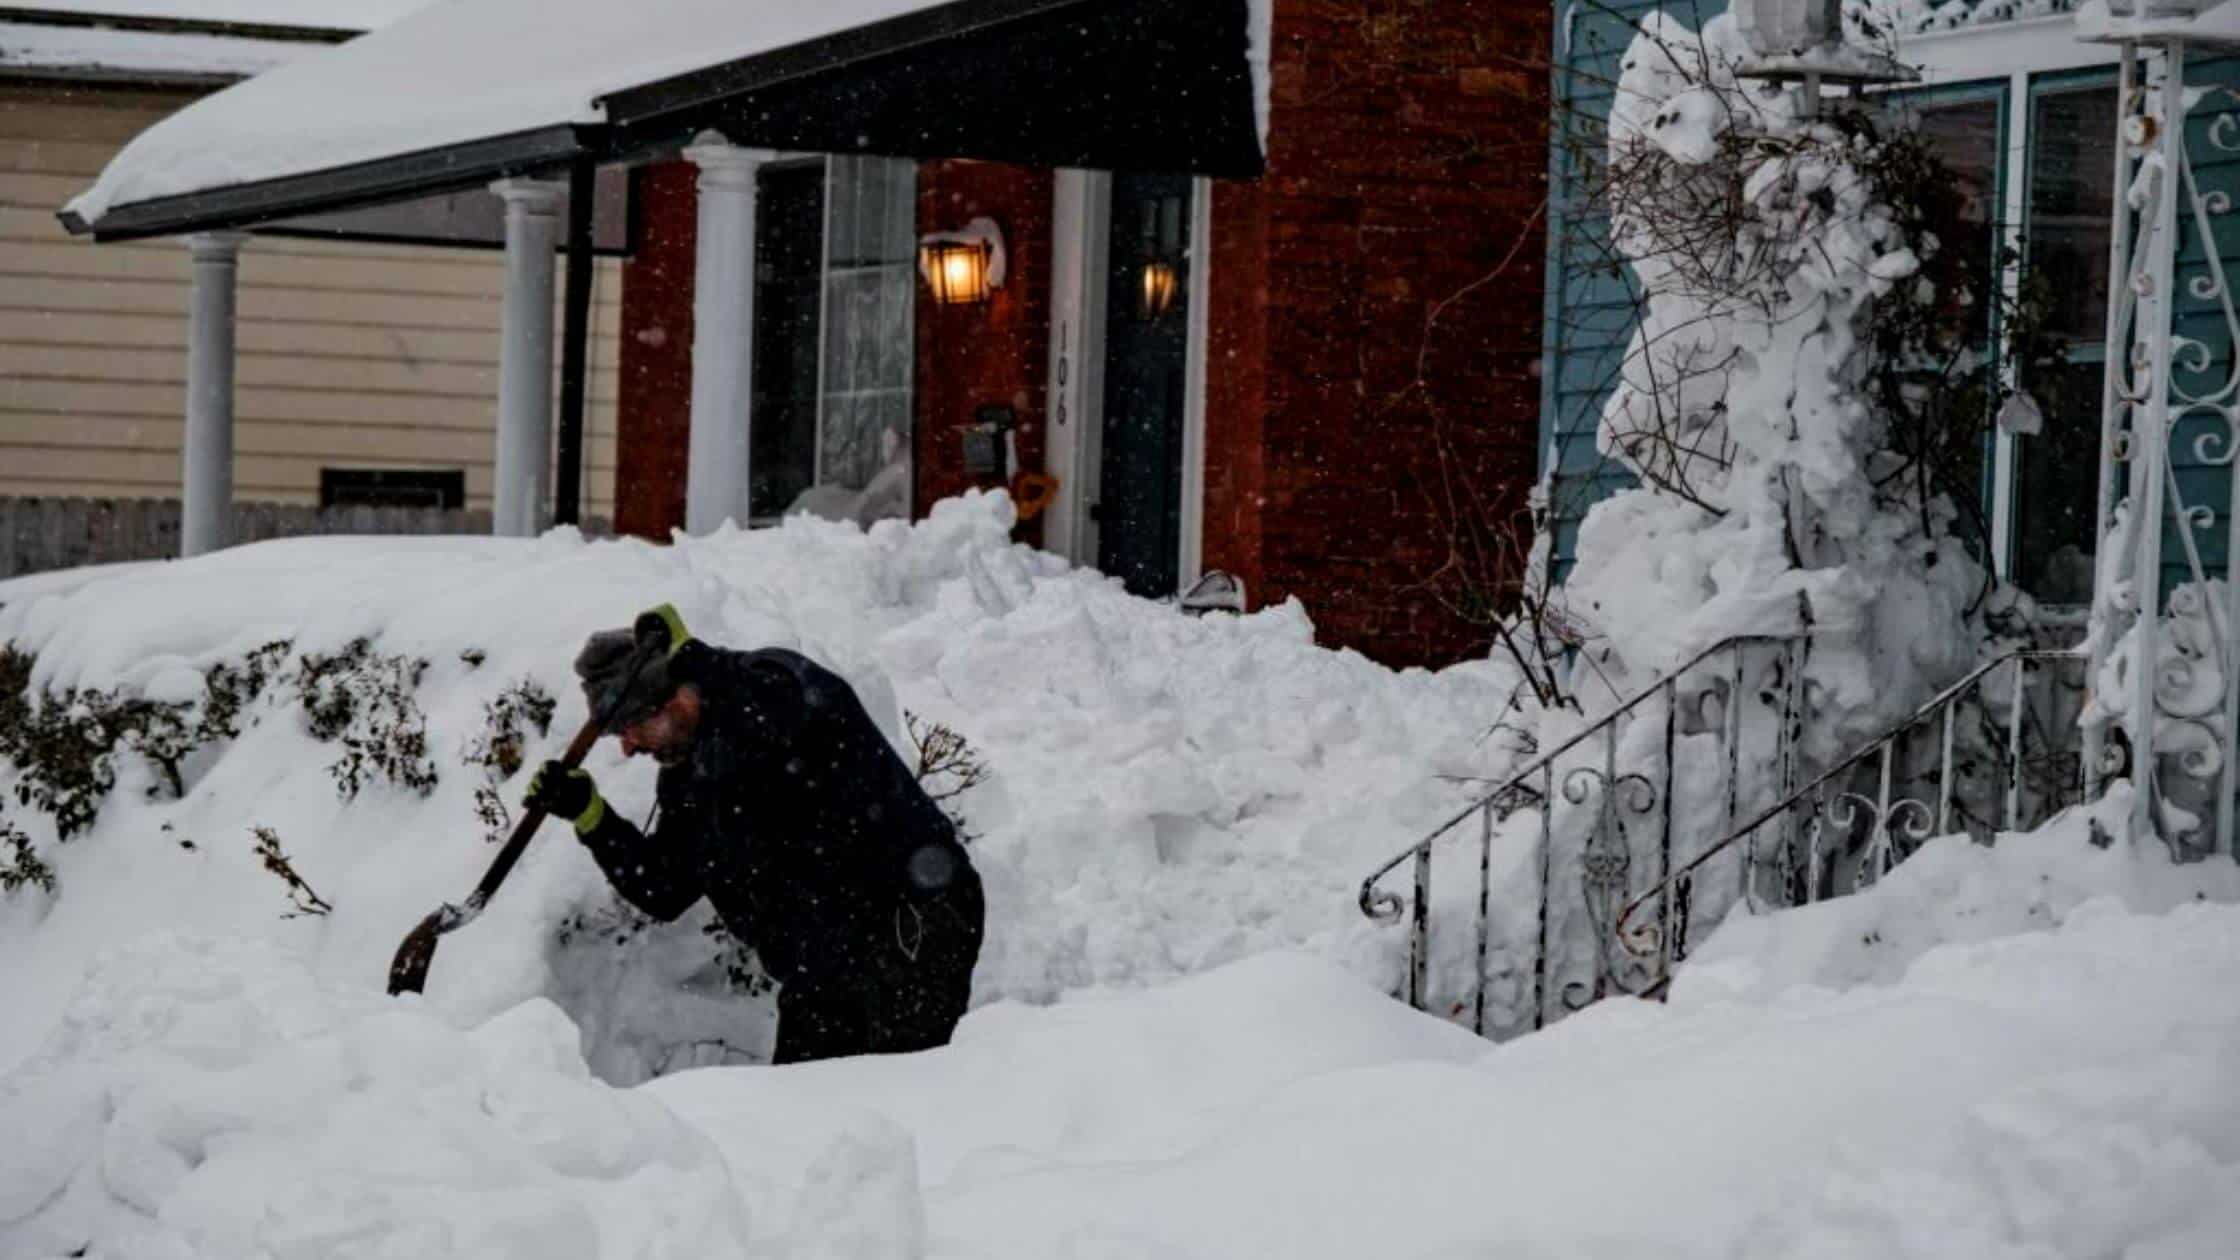 Once-In-A-Lifetime Blizzard Claims At Least 27 Lives In Western New York